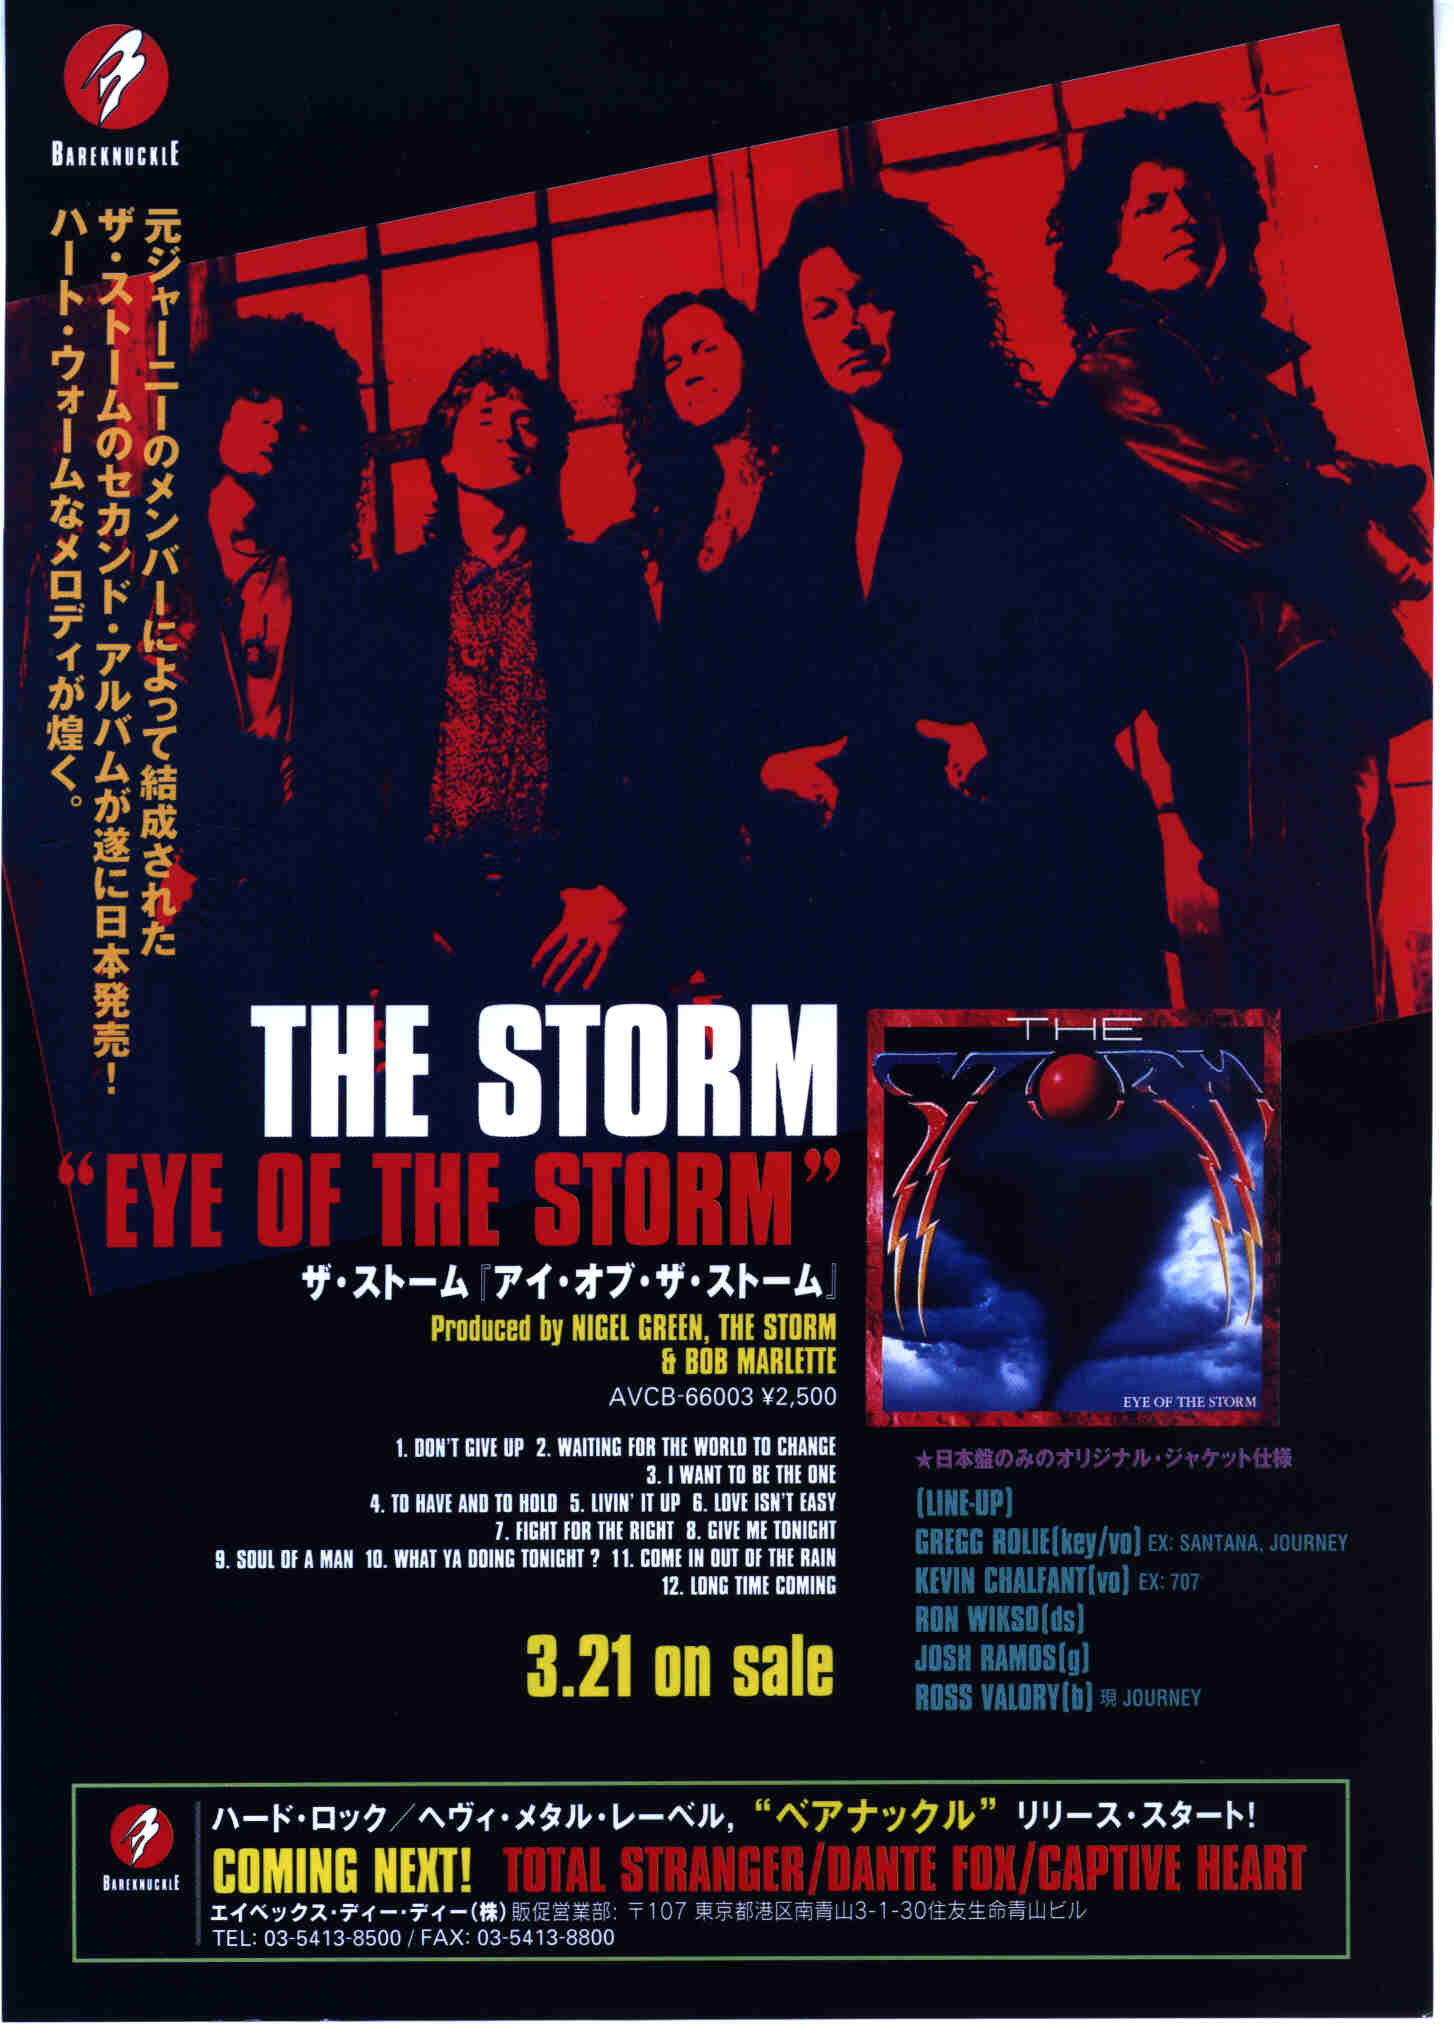 Japanese Promo Poster for "Eye of The Storm"